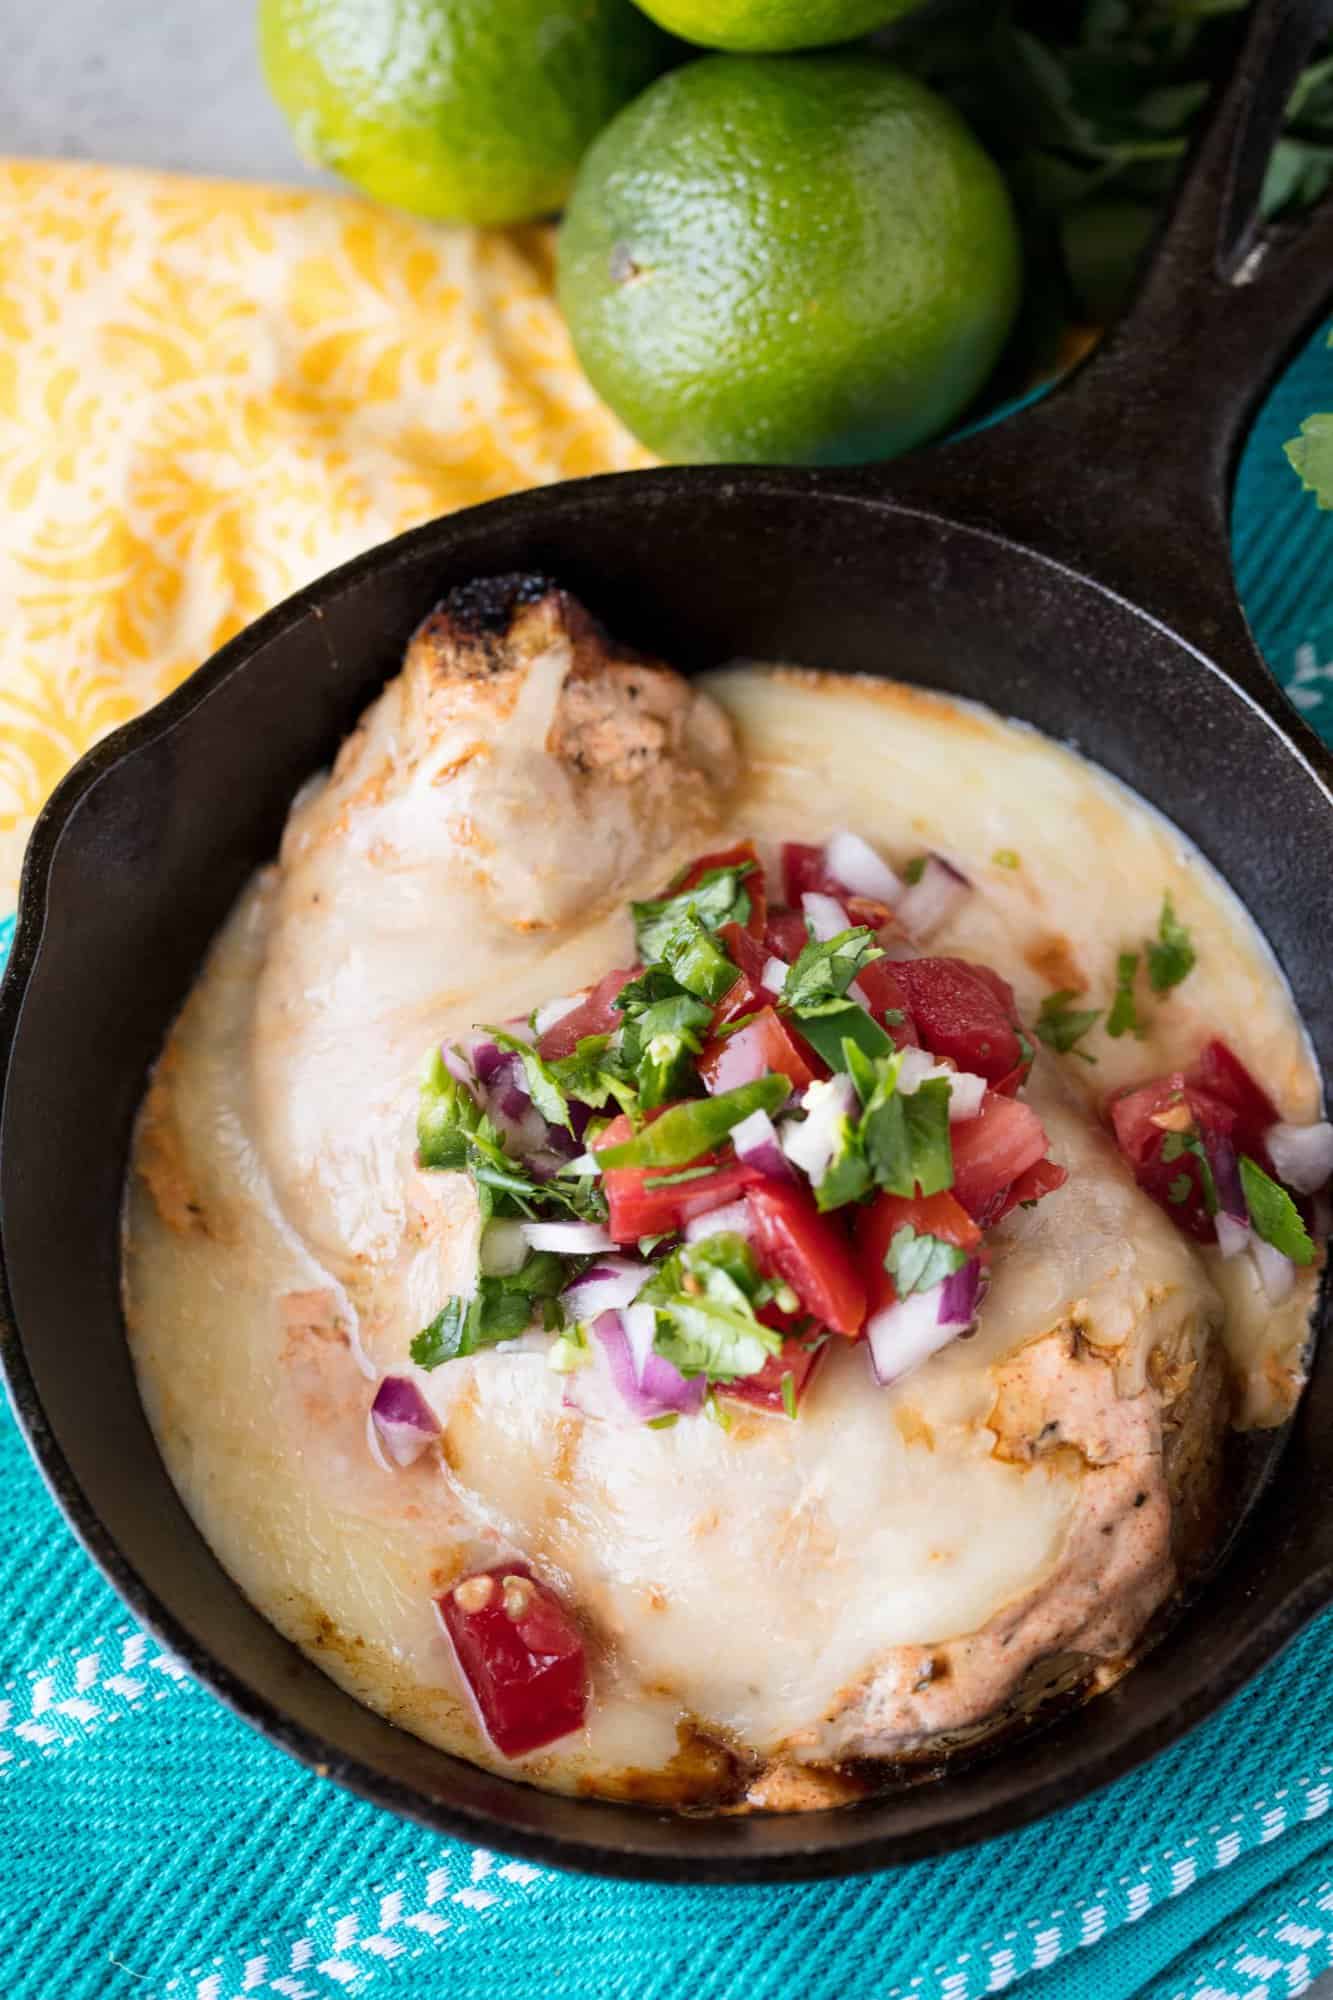 Fiesta Lime Chicken is like a party in your mouth. So flavorful and cheesy, this is a chicken dish to remember!